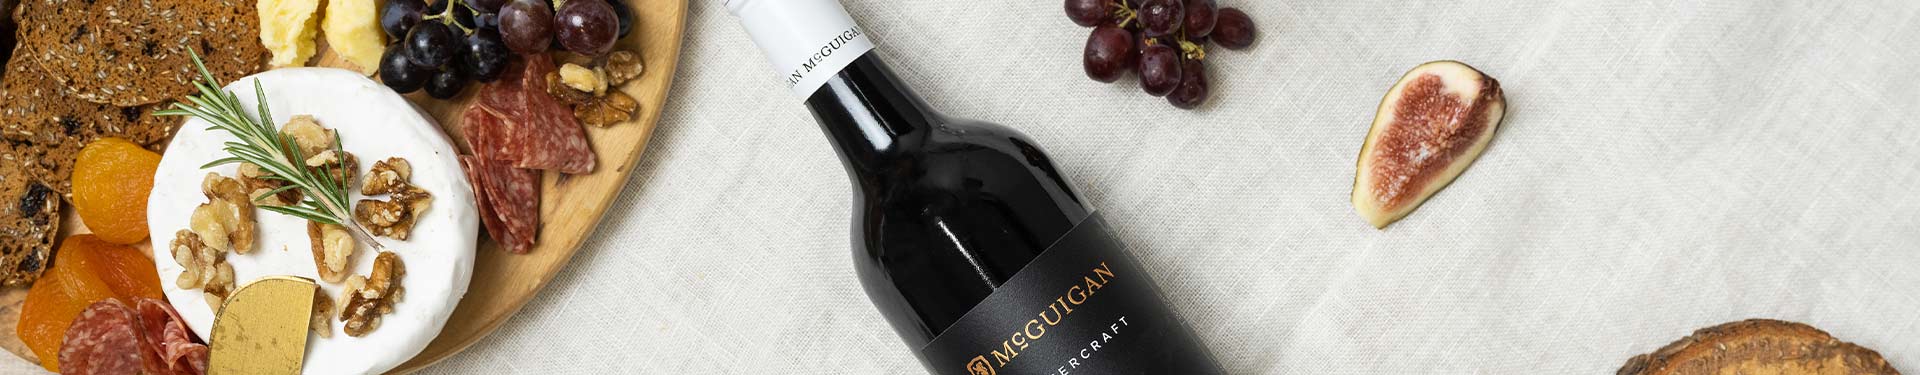 Bottle of McGuigan Noon Harvest Merlot lying on a table with a cheeseboard